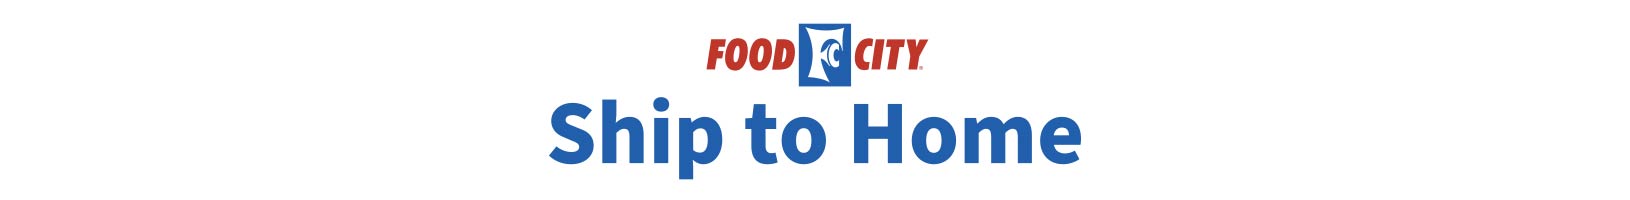 With Ship to Home from Food City you can order a wide array of bulk food items, pantry staples, pet care items and more online then have them shipped directly to your door. Just another way you can shop at Food City grocery stores.